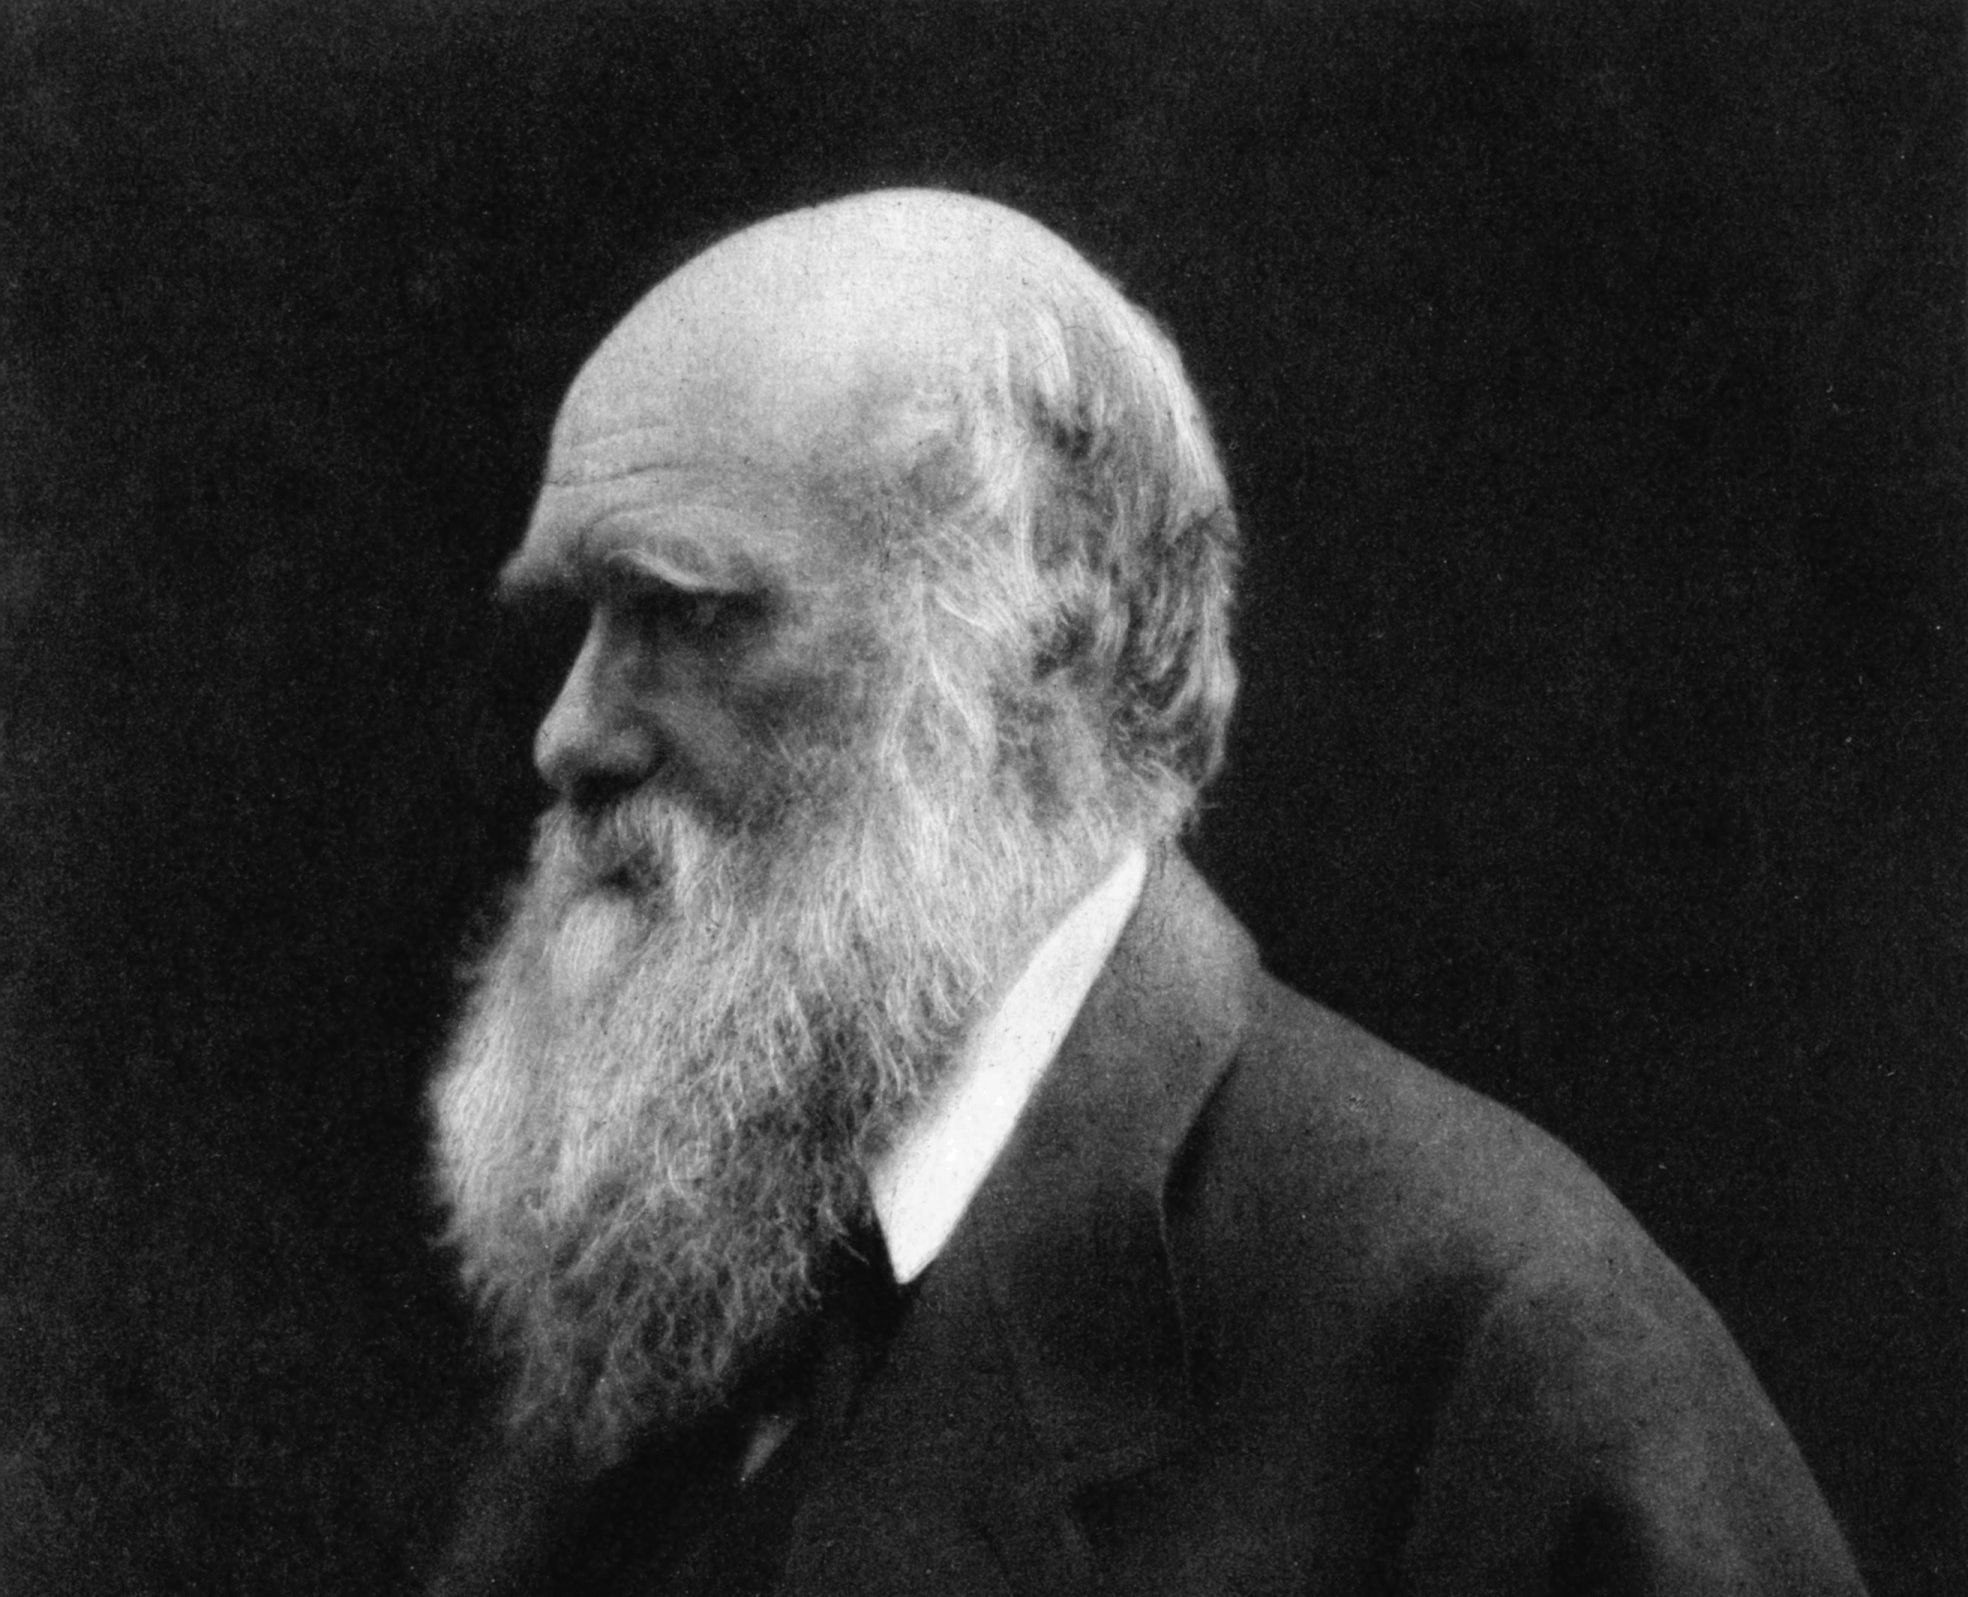 A portrait of Charles Darwin as an old man by Julia Margaret Cameron.